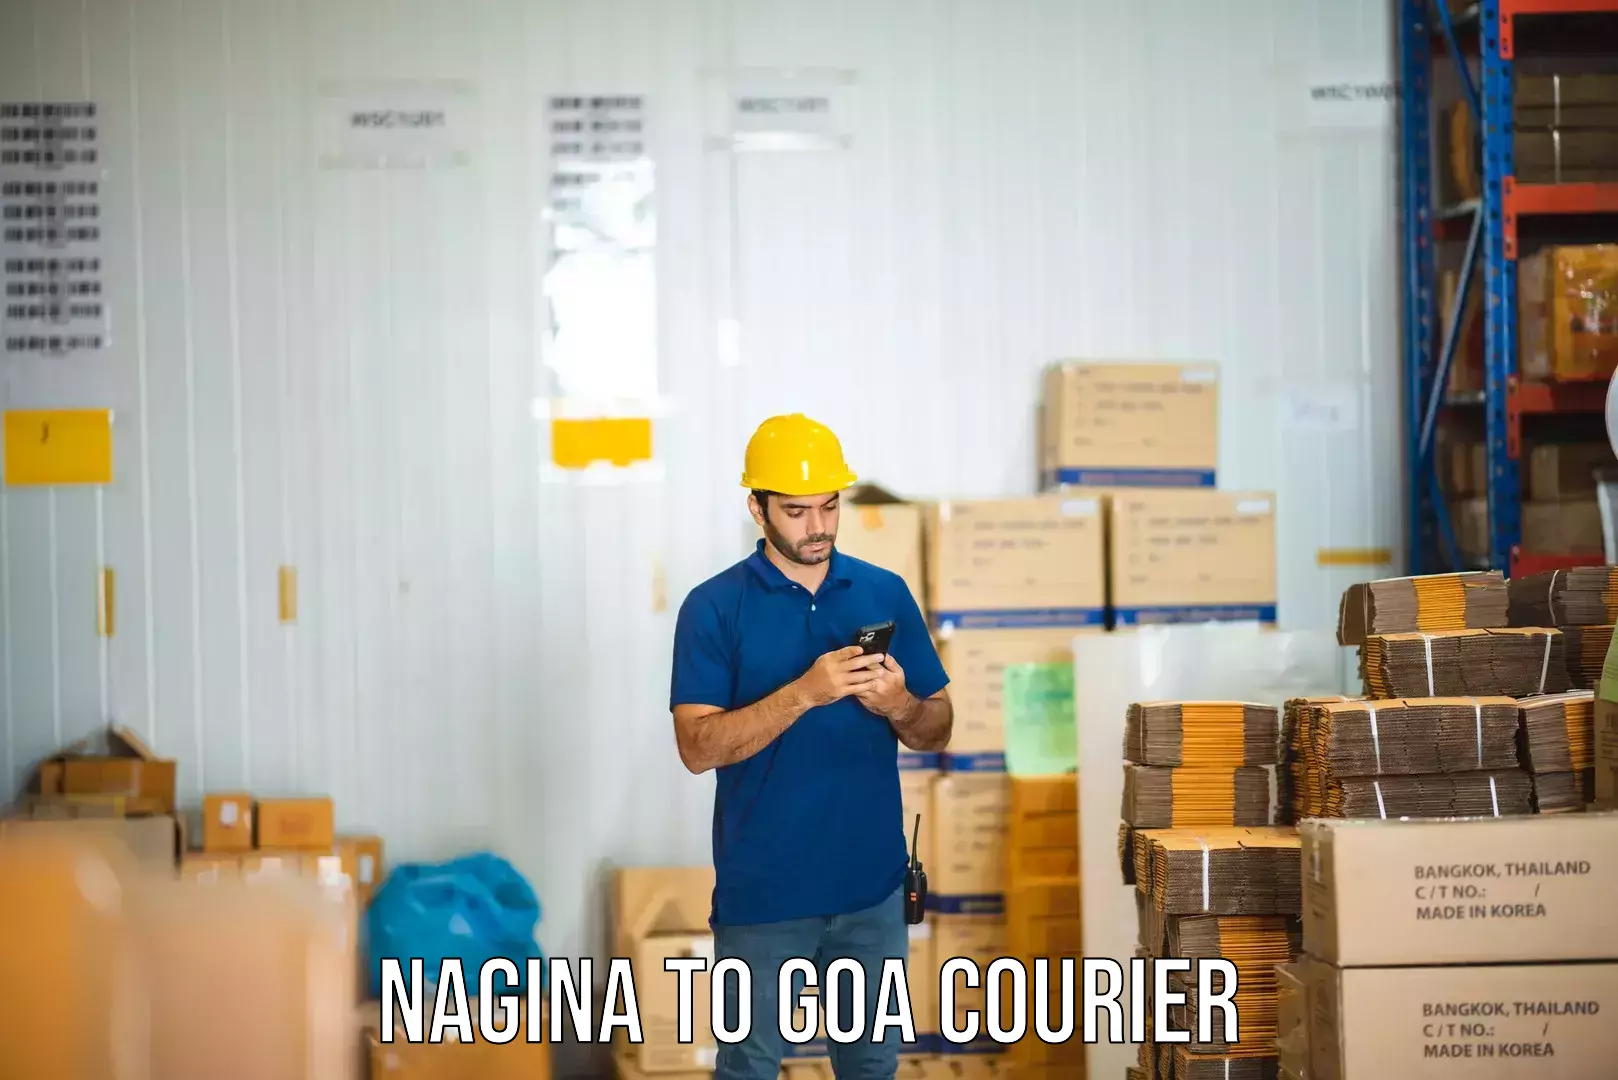 State-of-the-art courier technology in Nagina to South Goa